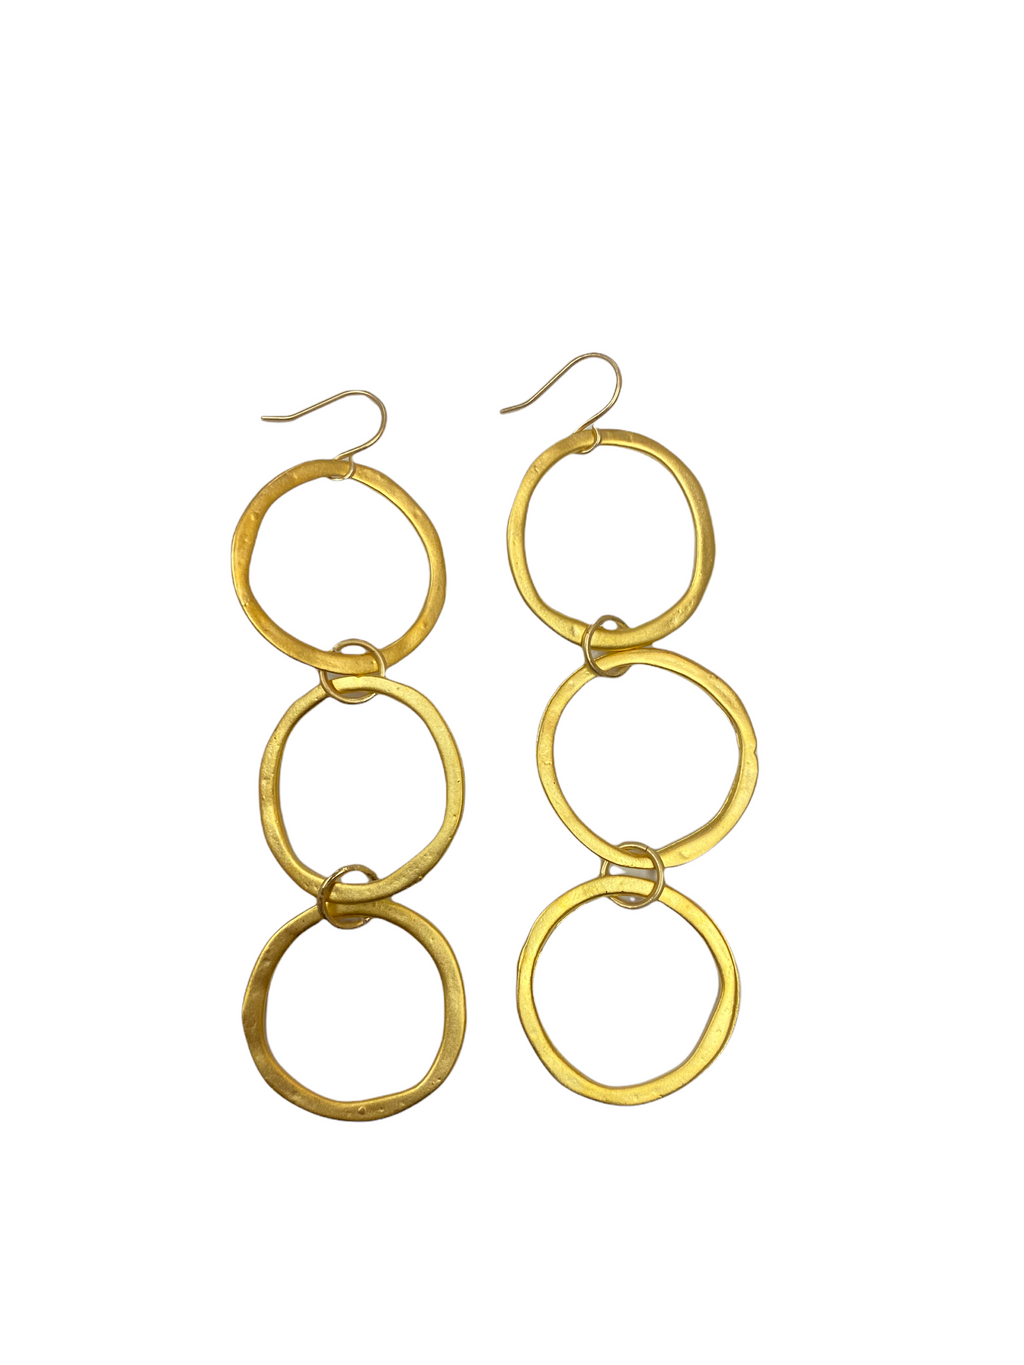 Gold drop earrings featuring three interconnected circles, ideal for adding elegance to any outfit.